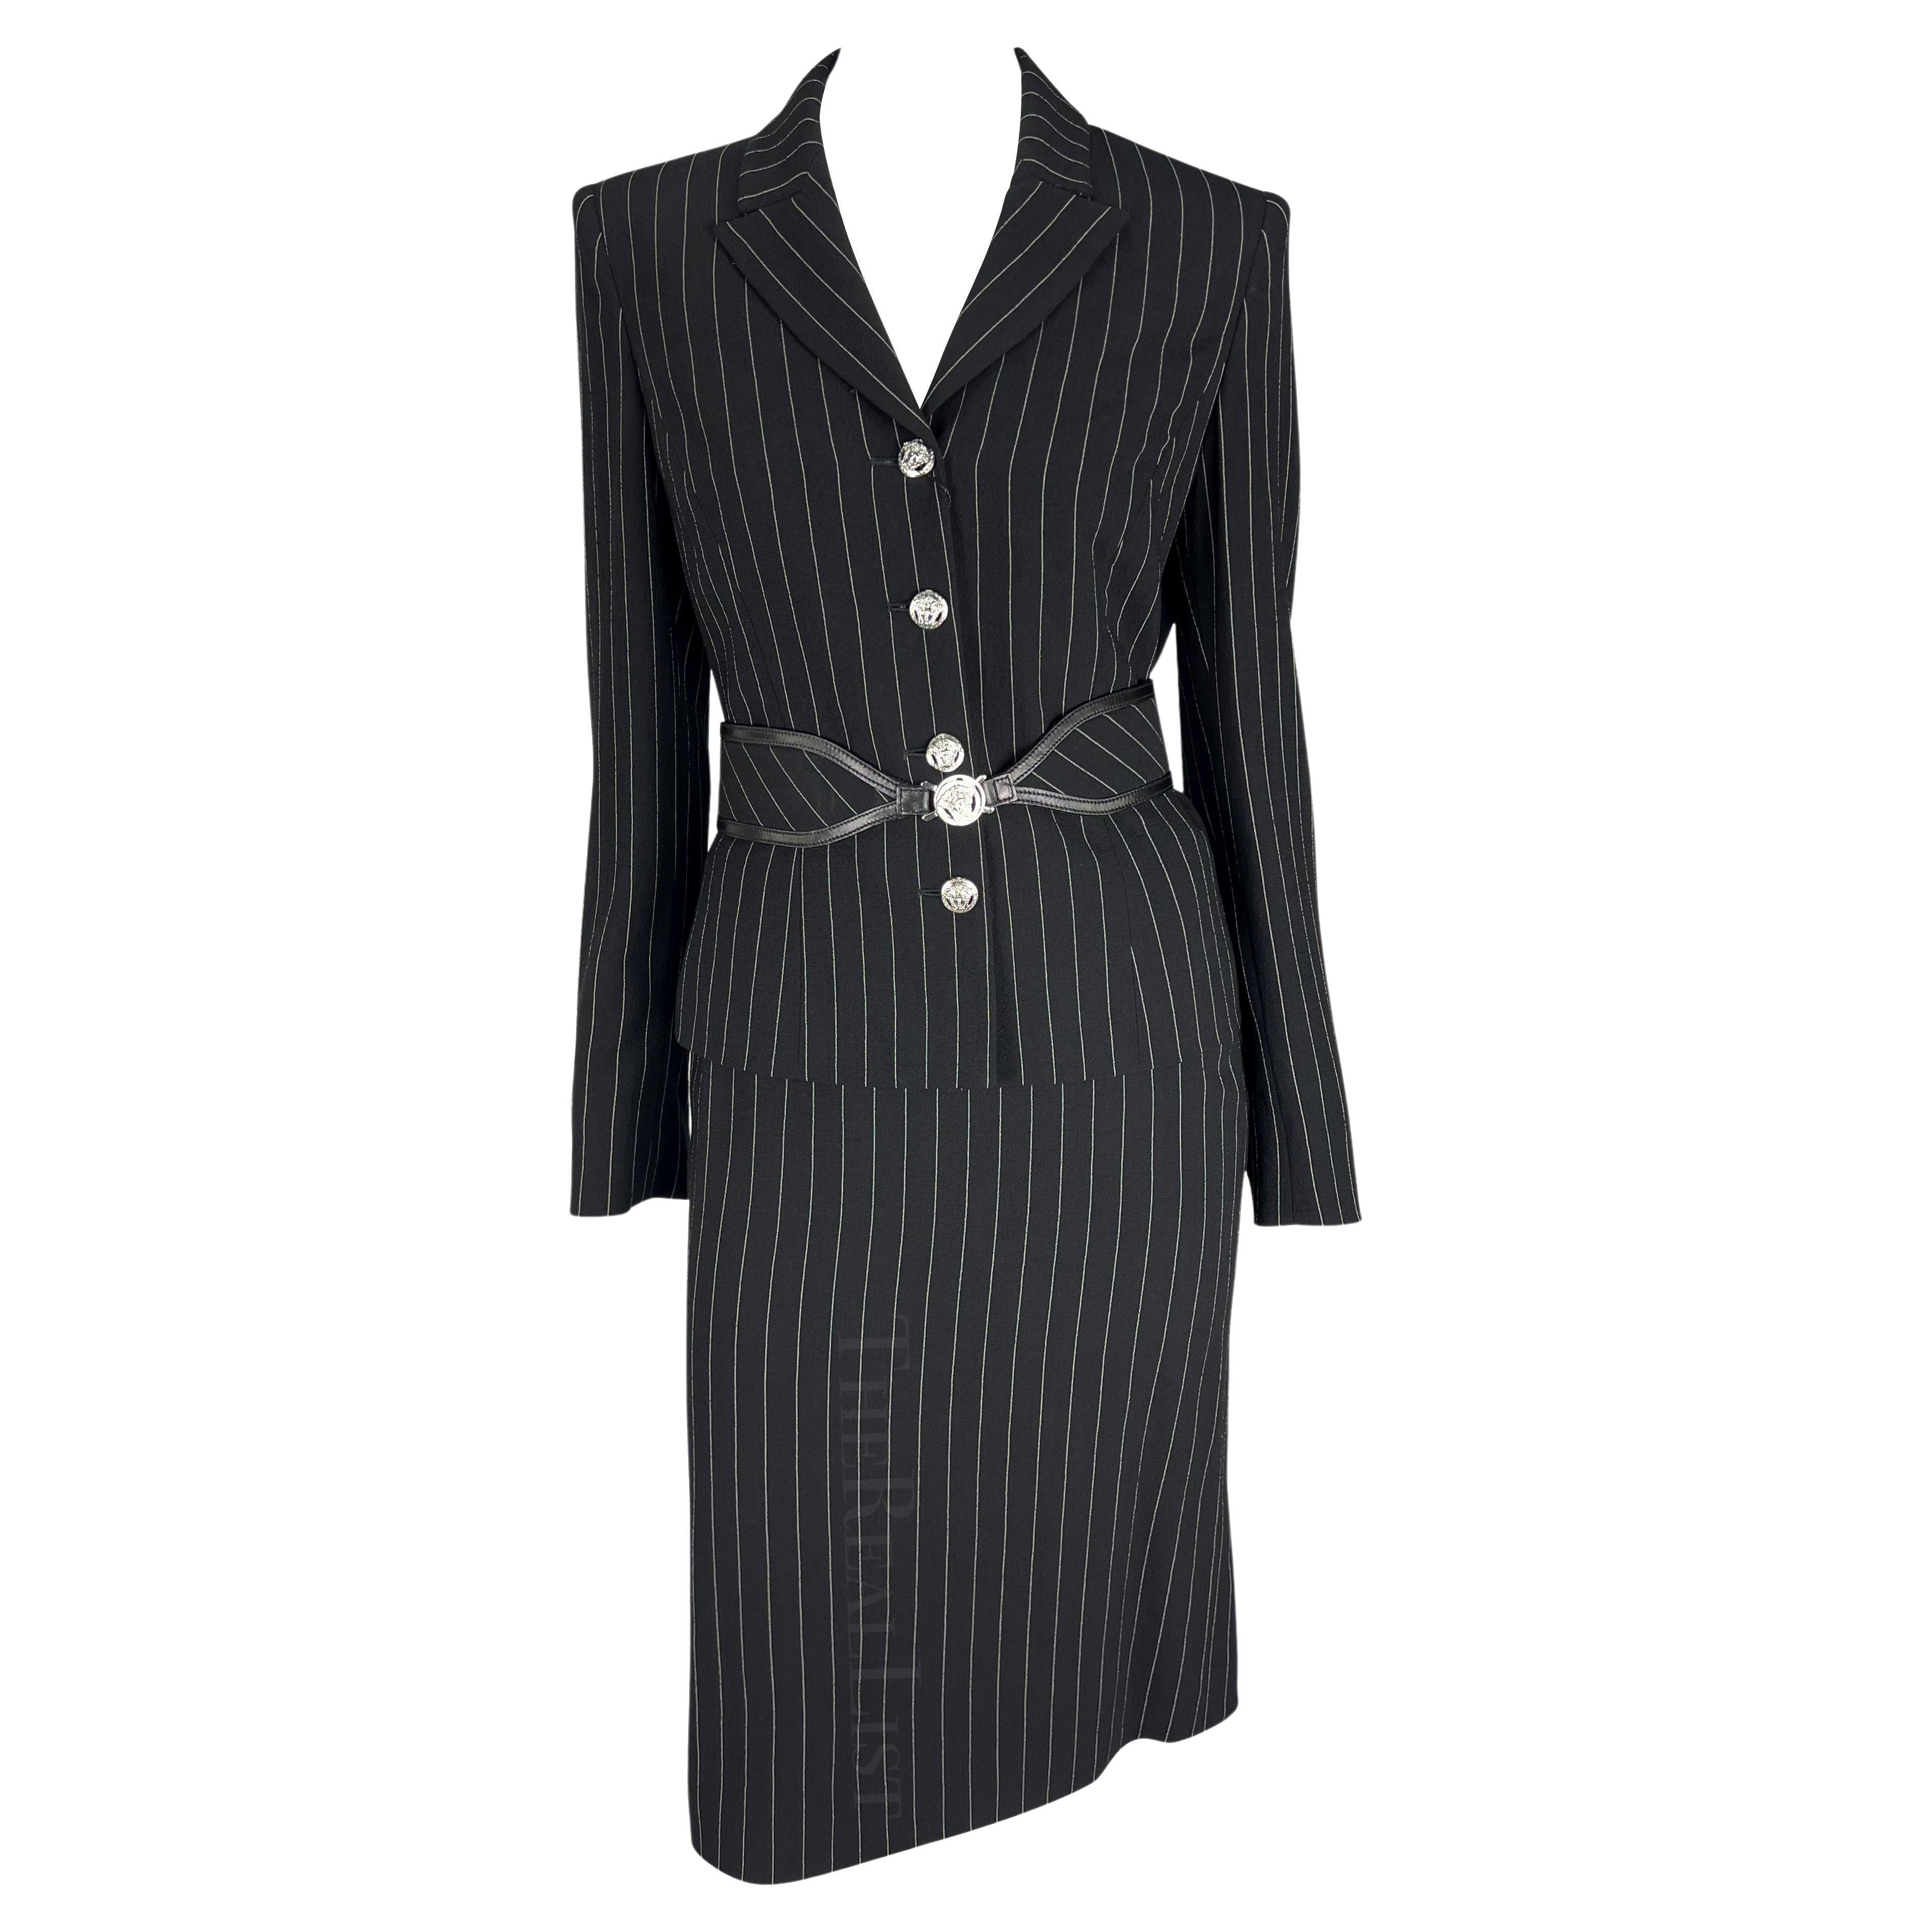 NWT F/W 2004 Versace by Donatella Black Wool Blend Pinstripe Medusa Belted Suit For Sale